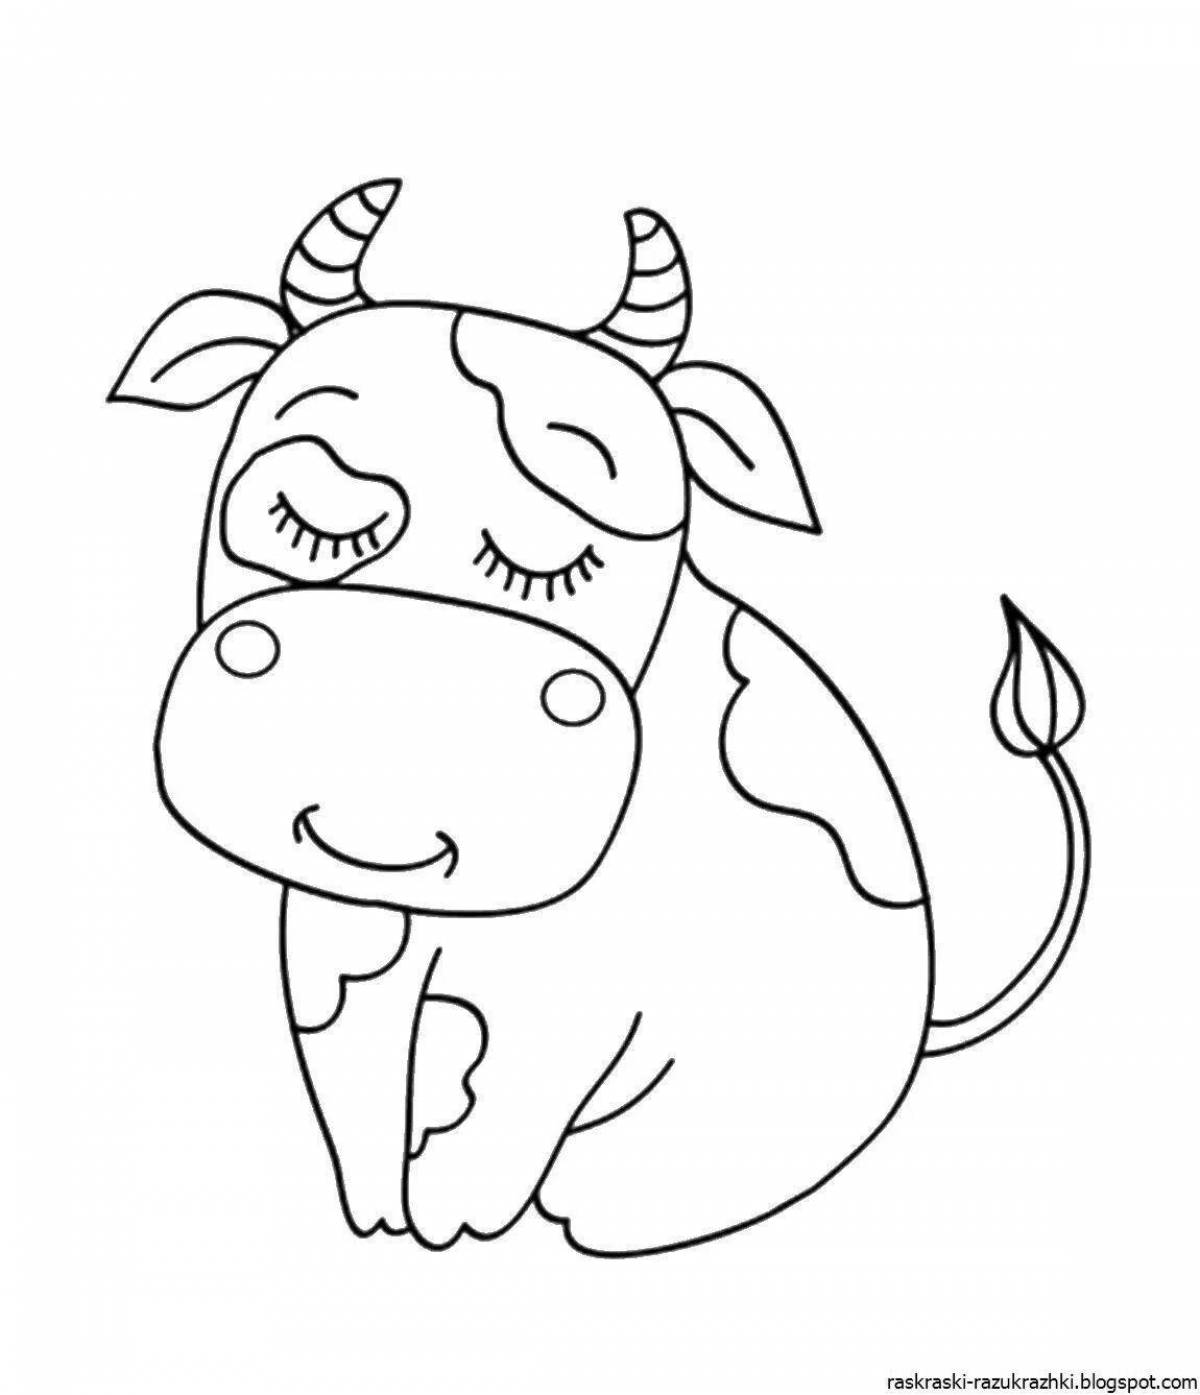 Rough cow coloring pages for kids